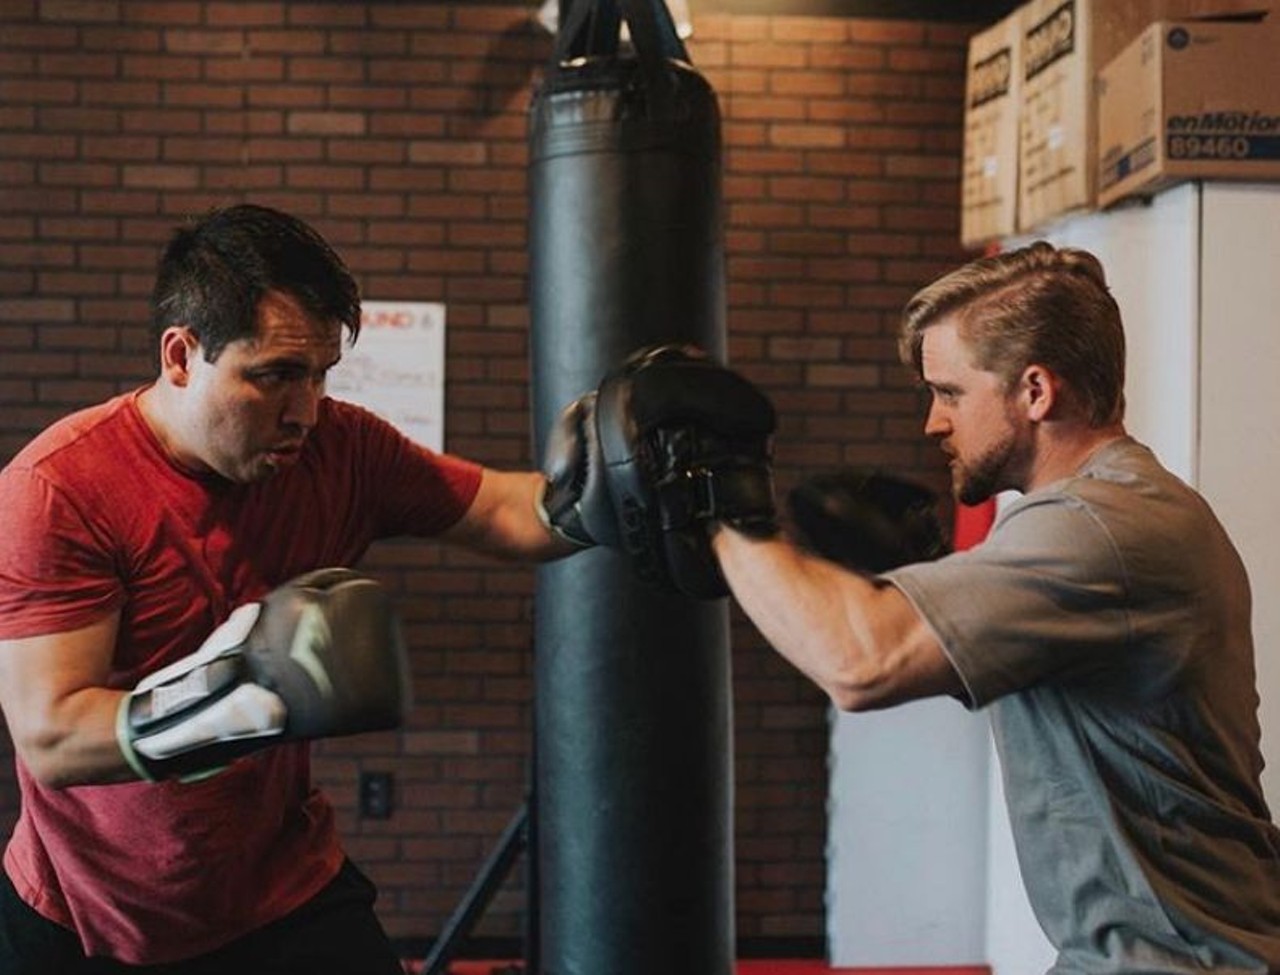 9-Round  
3150 S Orange Ave, 321-441-4999
Put a kick into workout schedule at this kickboxing gym. Coaches guide you through high intensity workouts without strict class times.
Photo via 9roundcentralflorida / Instagram